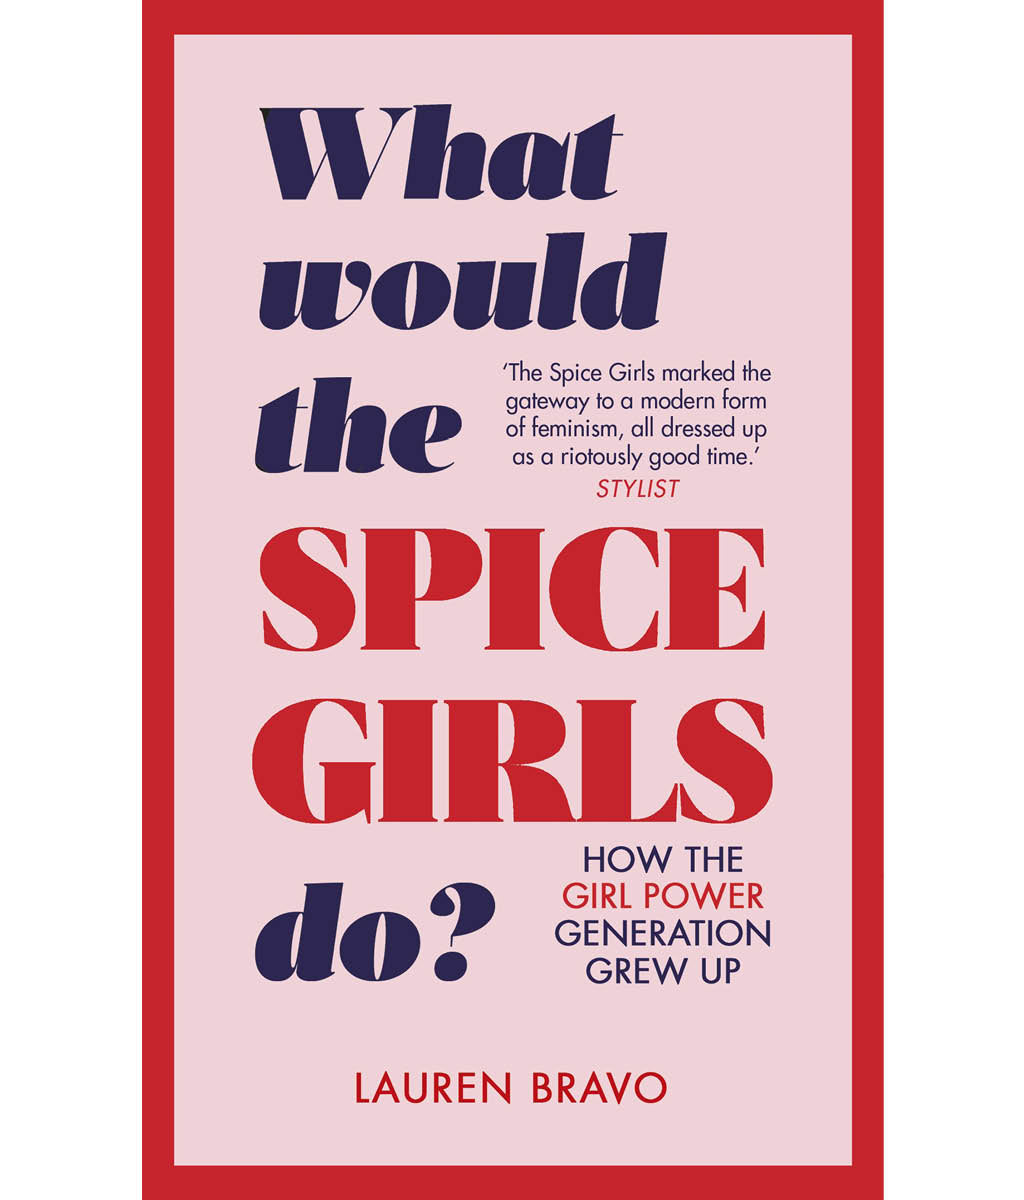 What Would the Spice Girls Do?: How the Girl Power Generation Grew Up by Lauren Bravo